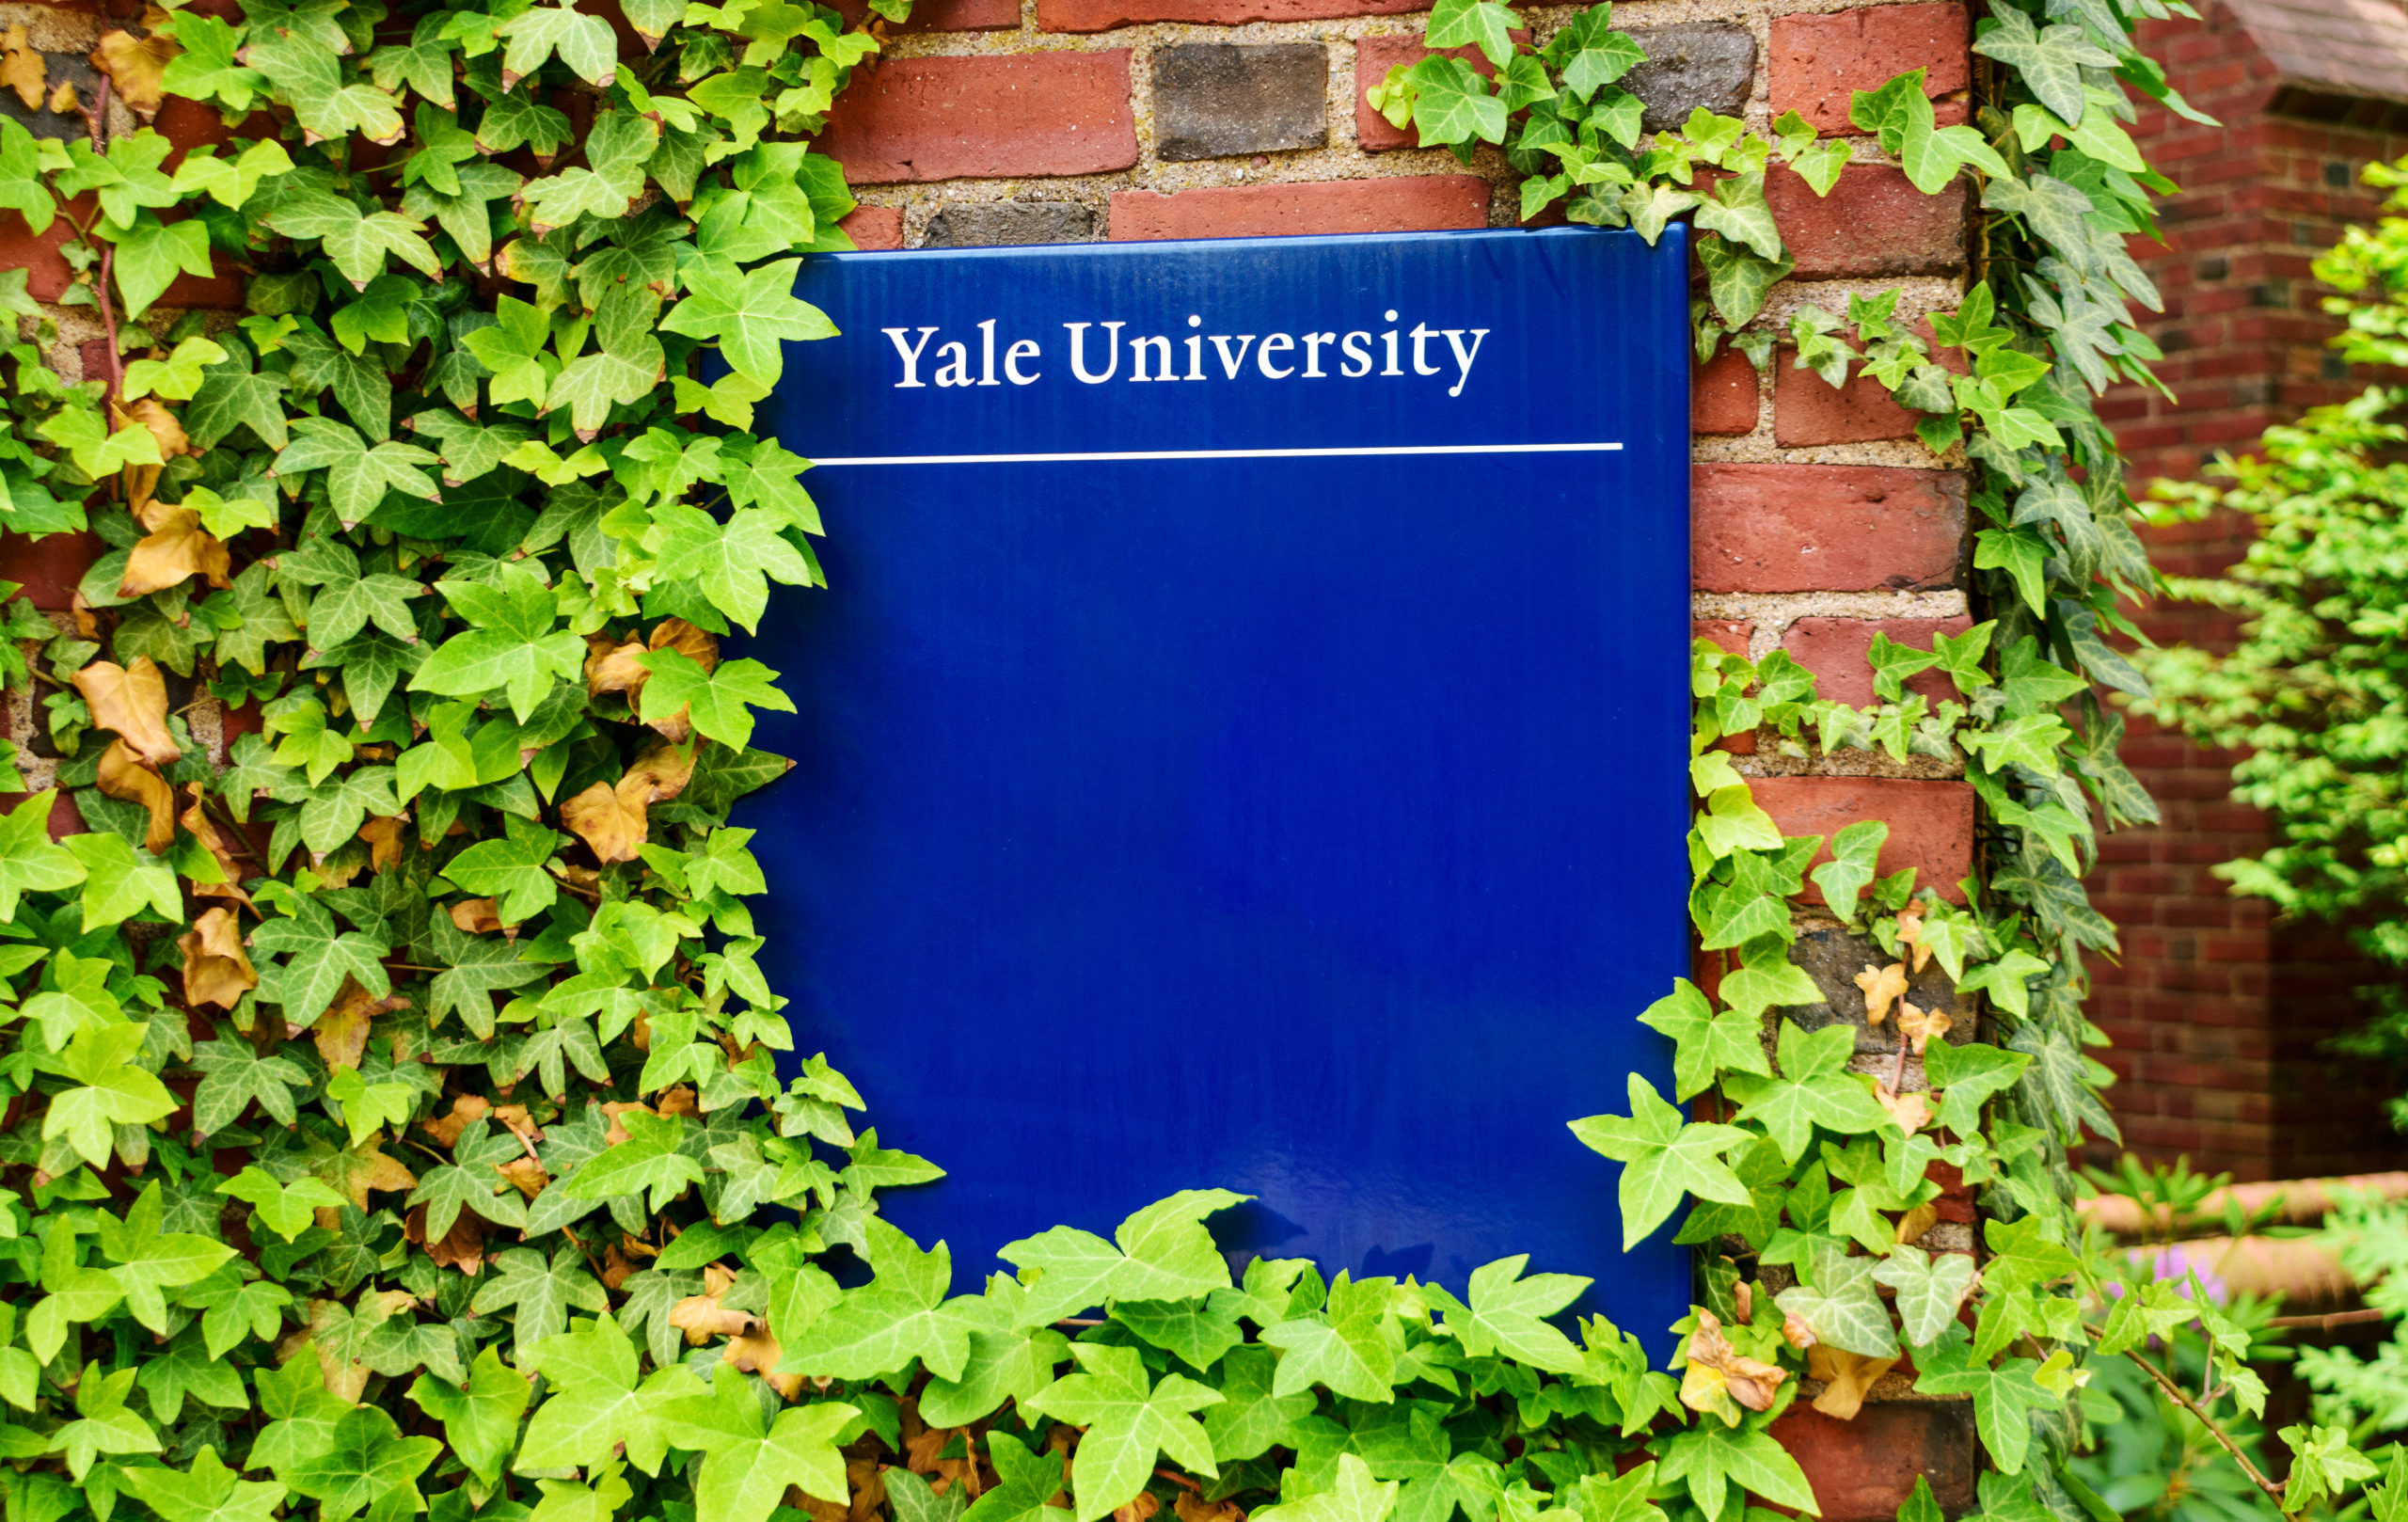 Yale,University,Sign,On,Brick,Building,Surrounded,By,Green,Vines